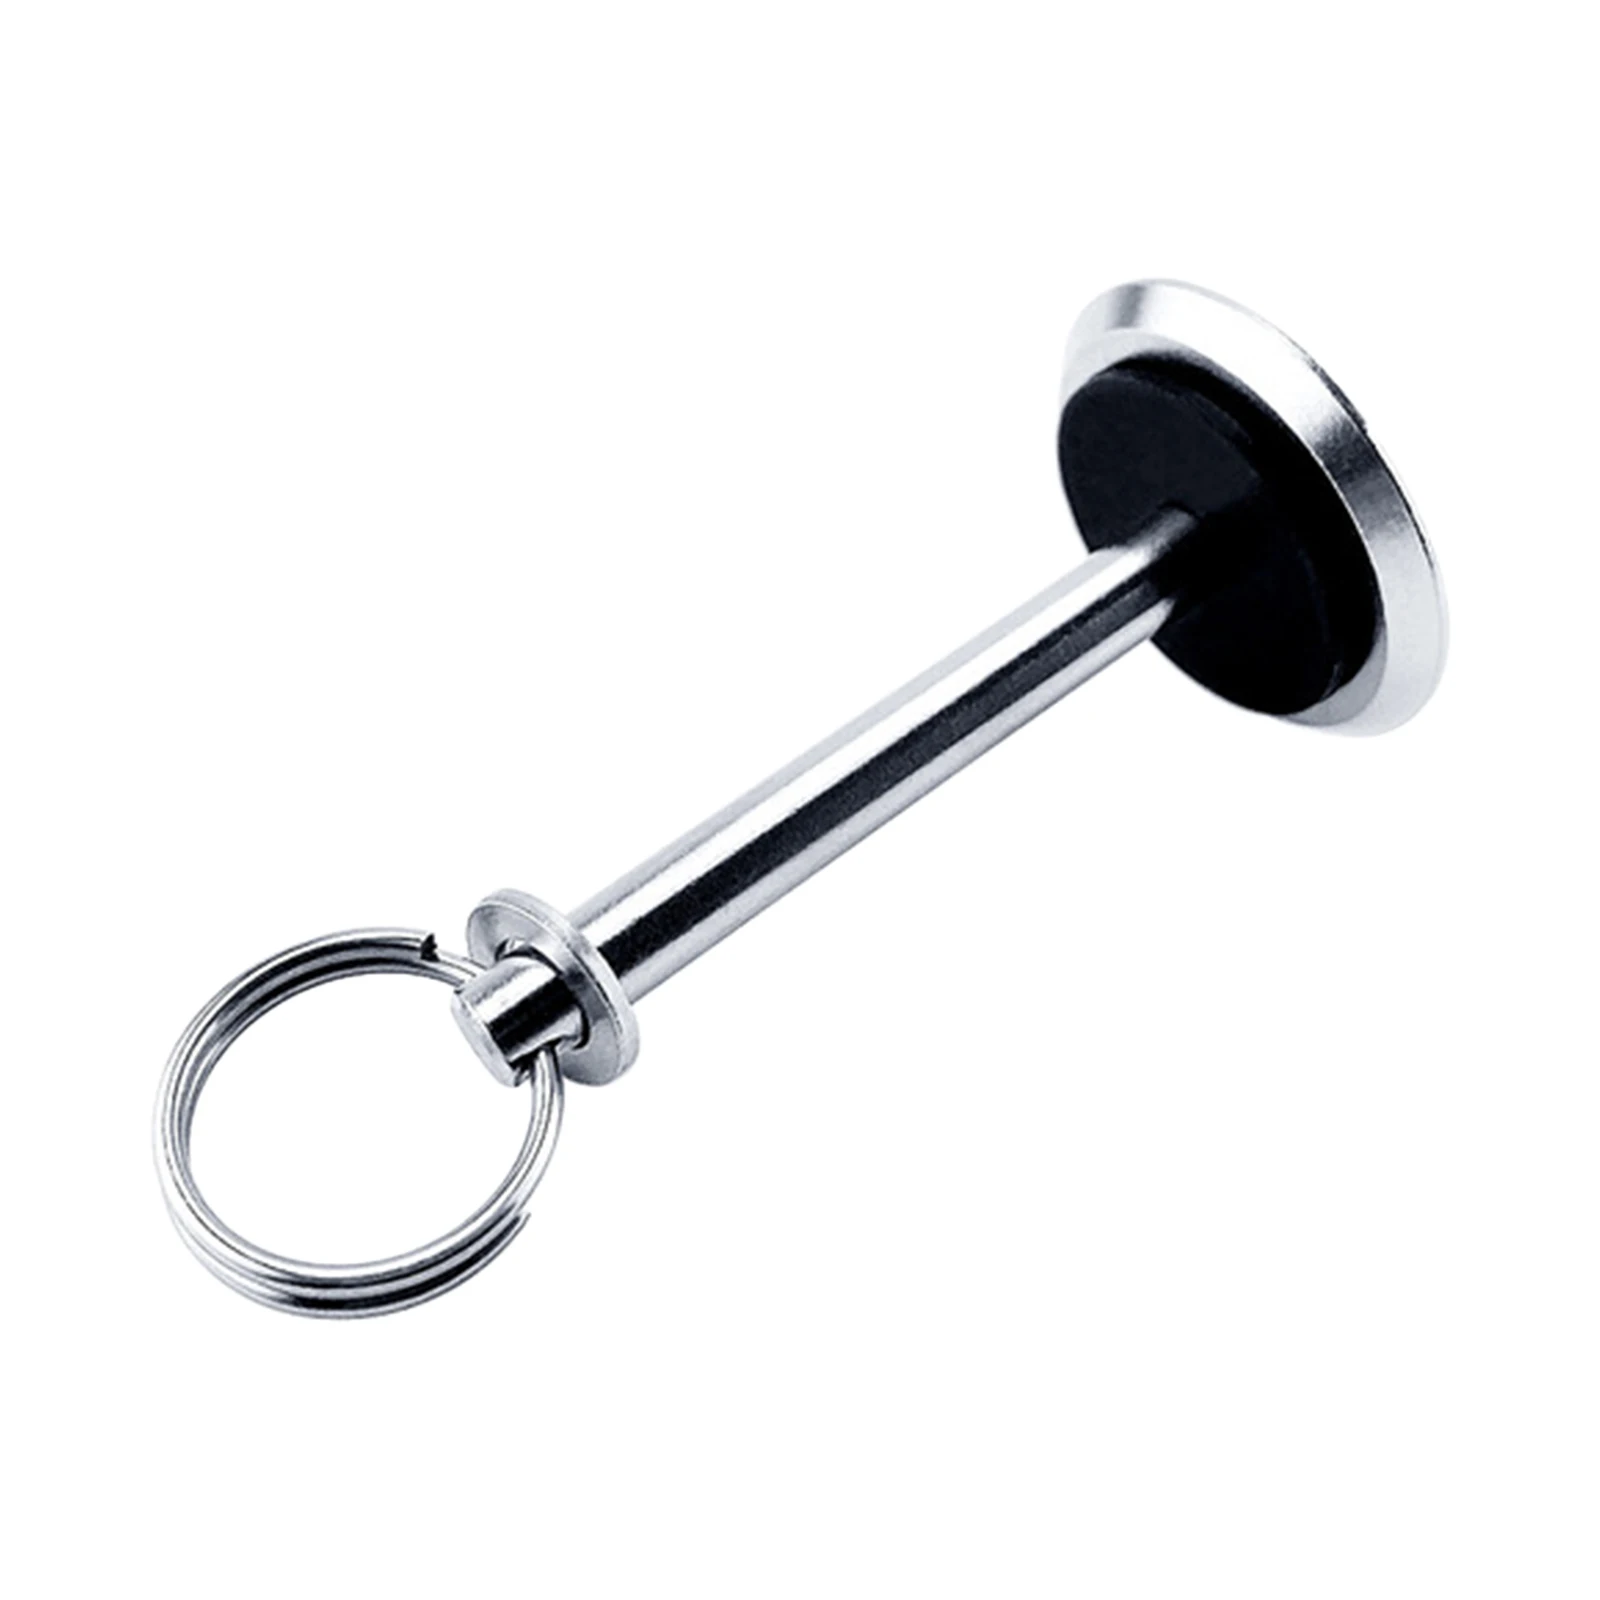 Hatch Cover Pull Handles, Stainless Steel Lid, Lift Pull ,for Boat Engine Cover Floor Storage